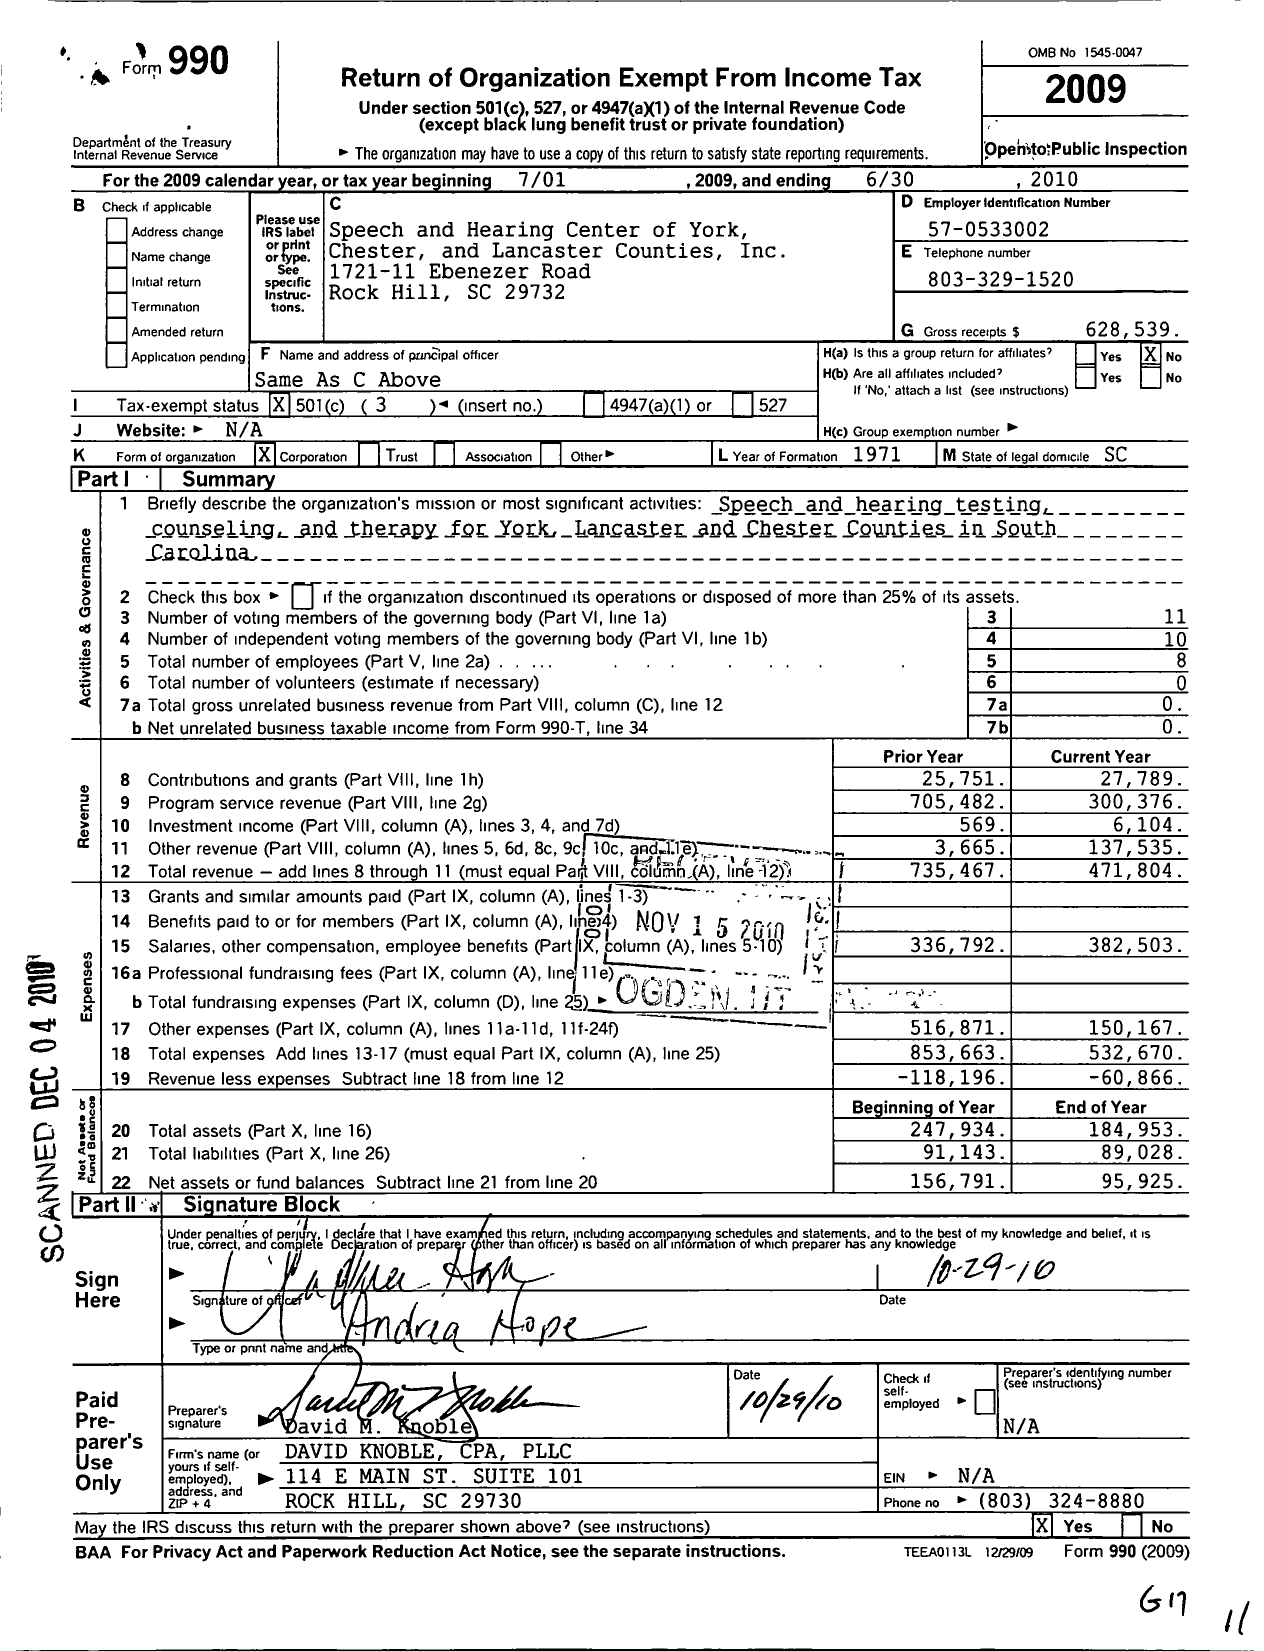 Image of first page of 2009 Form 990 for Speech and Hearing Center of York Chester and Lancaster Counties